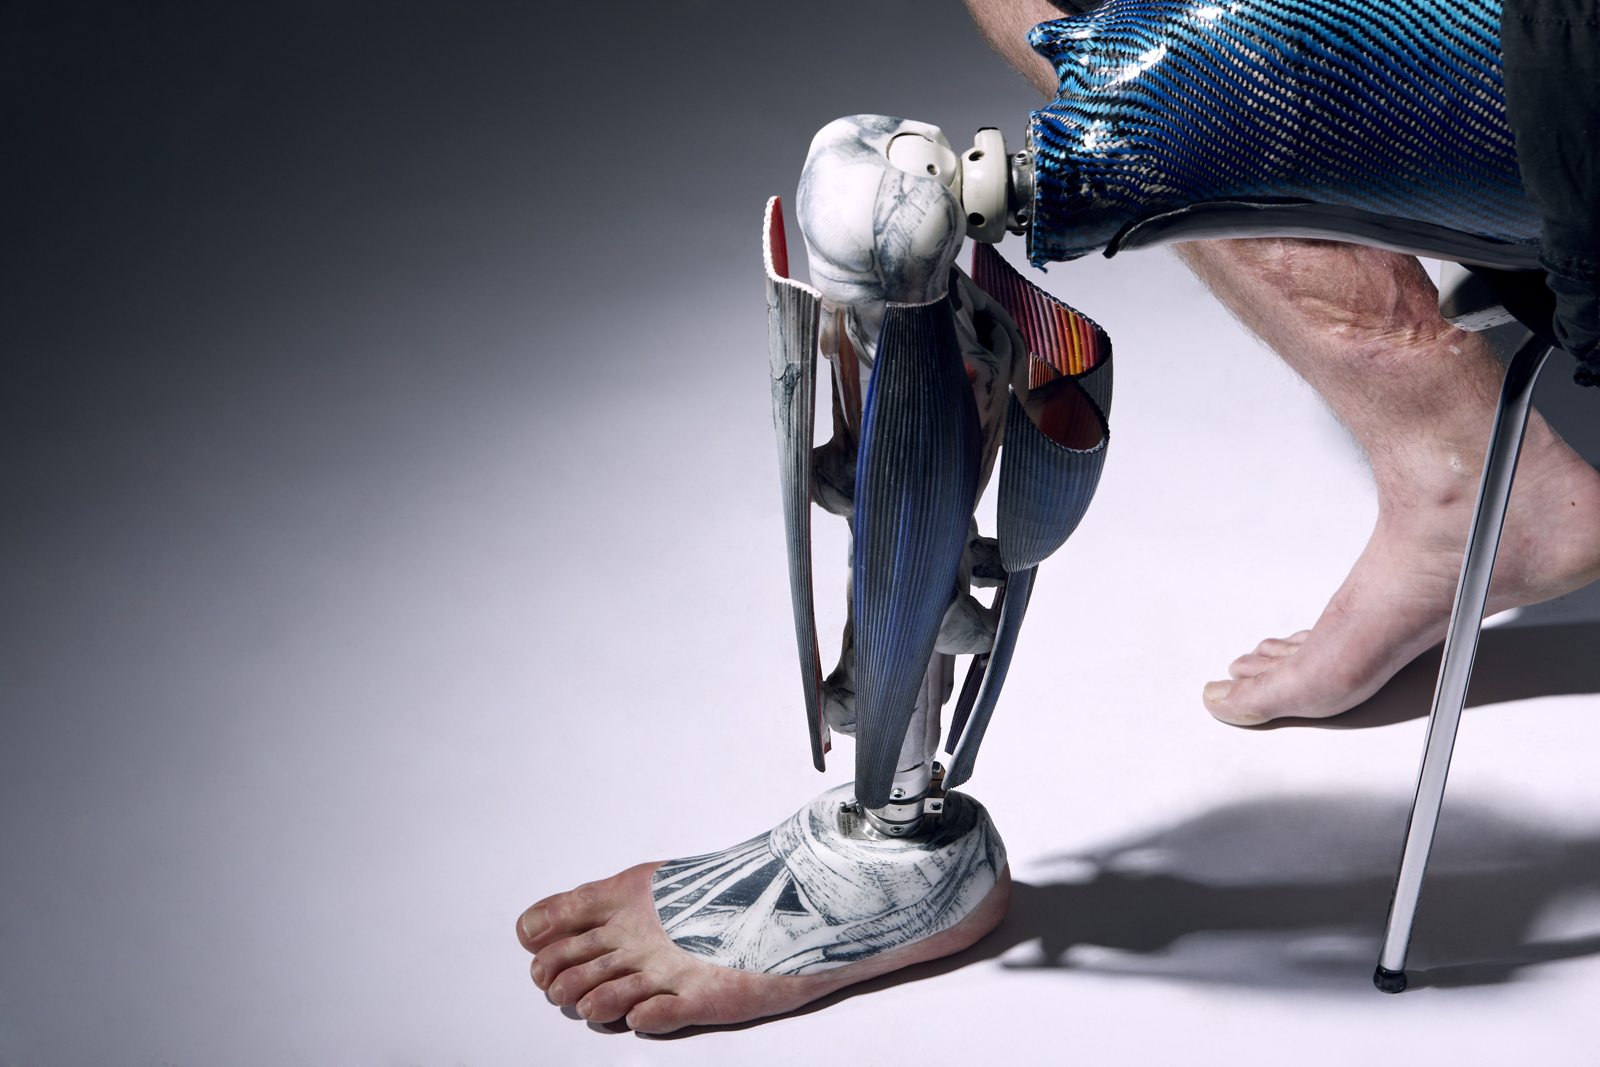 10. Innovations in Limb Replacement and Prosthetics